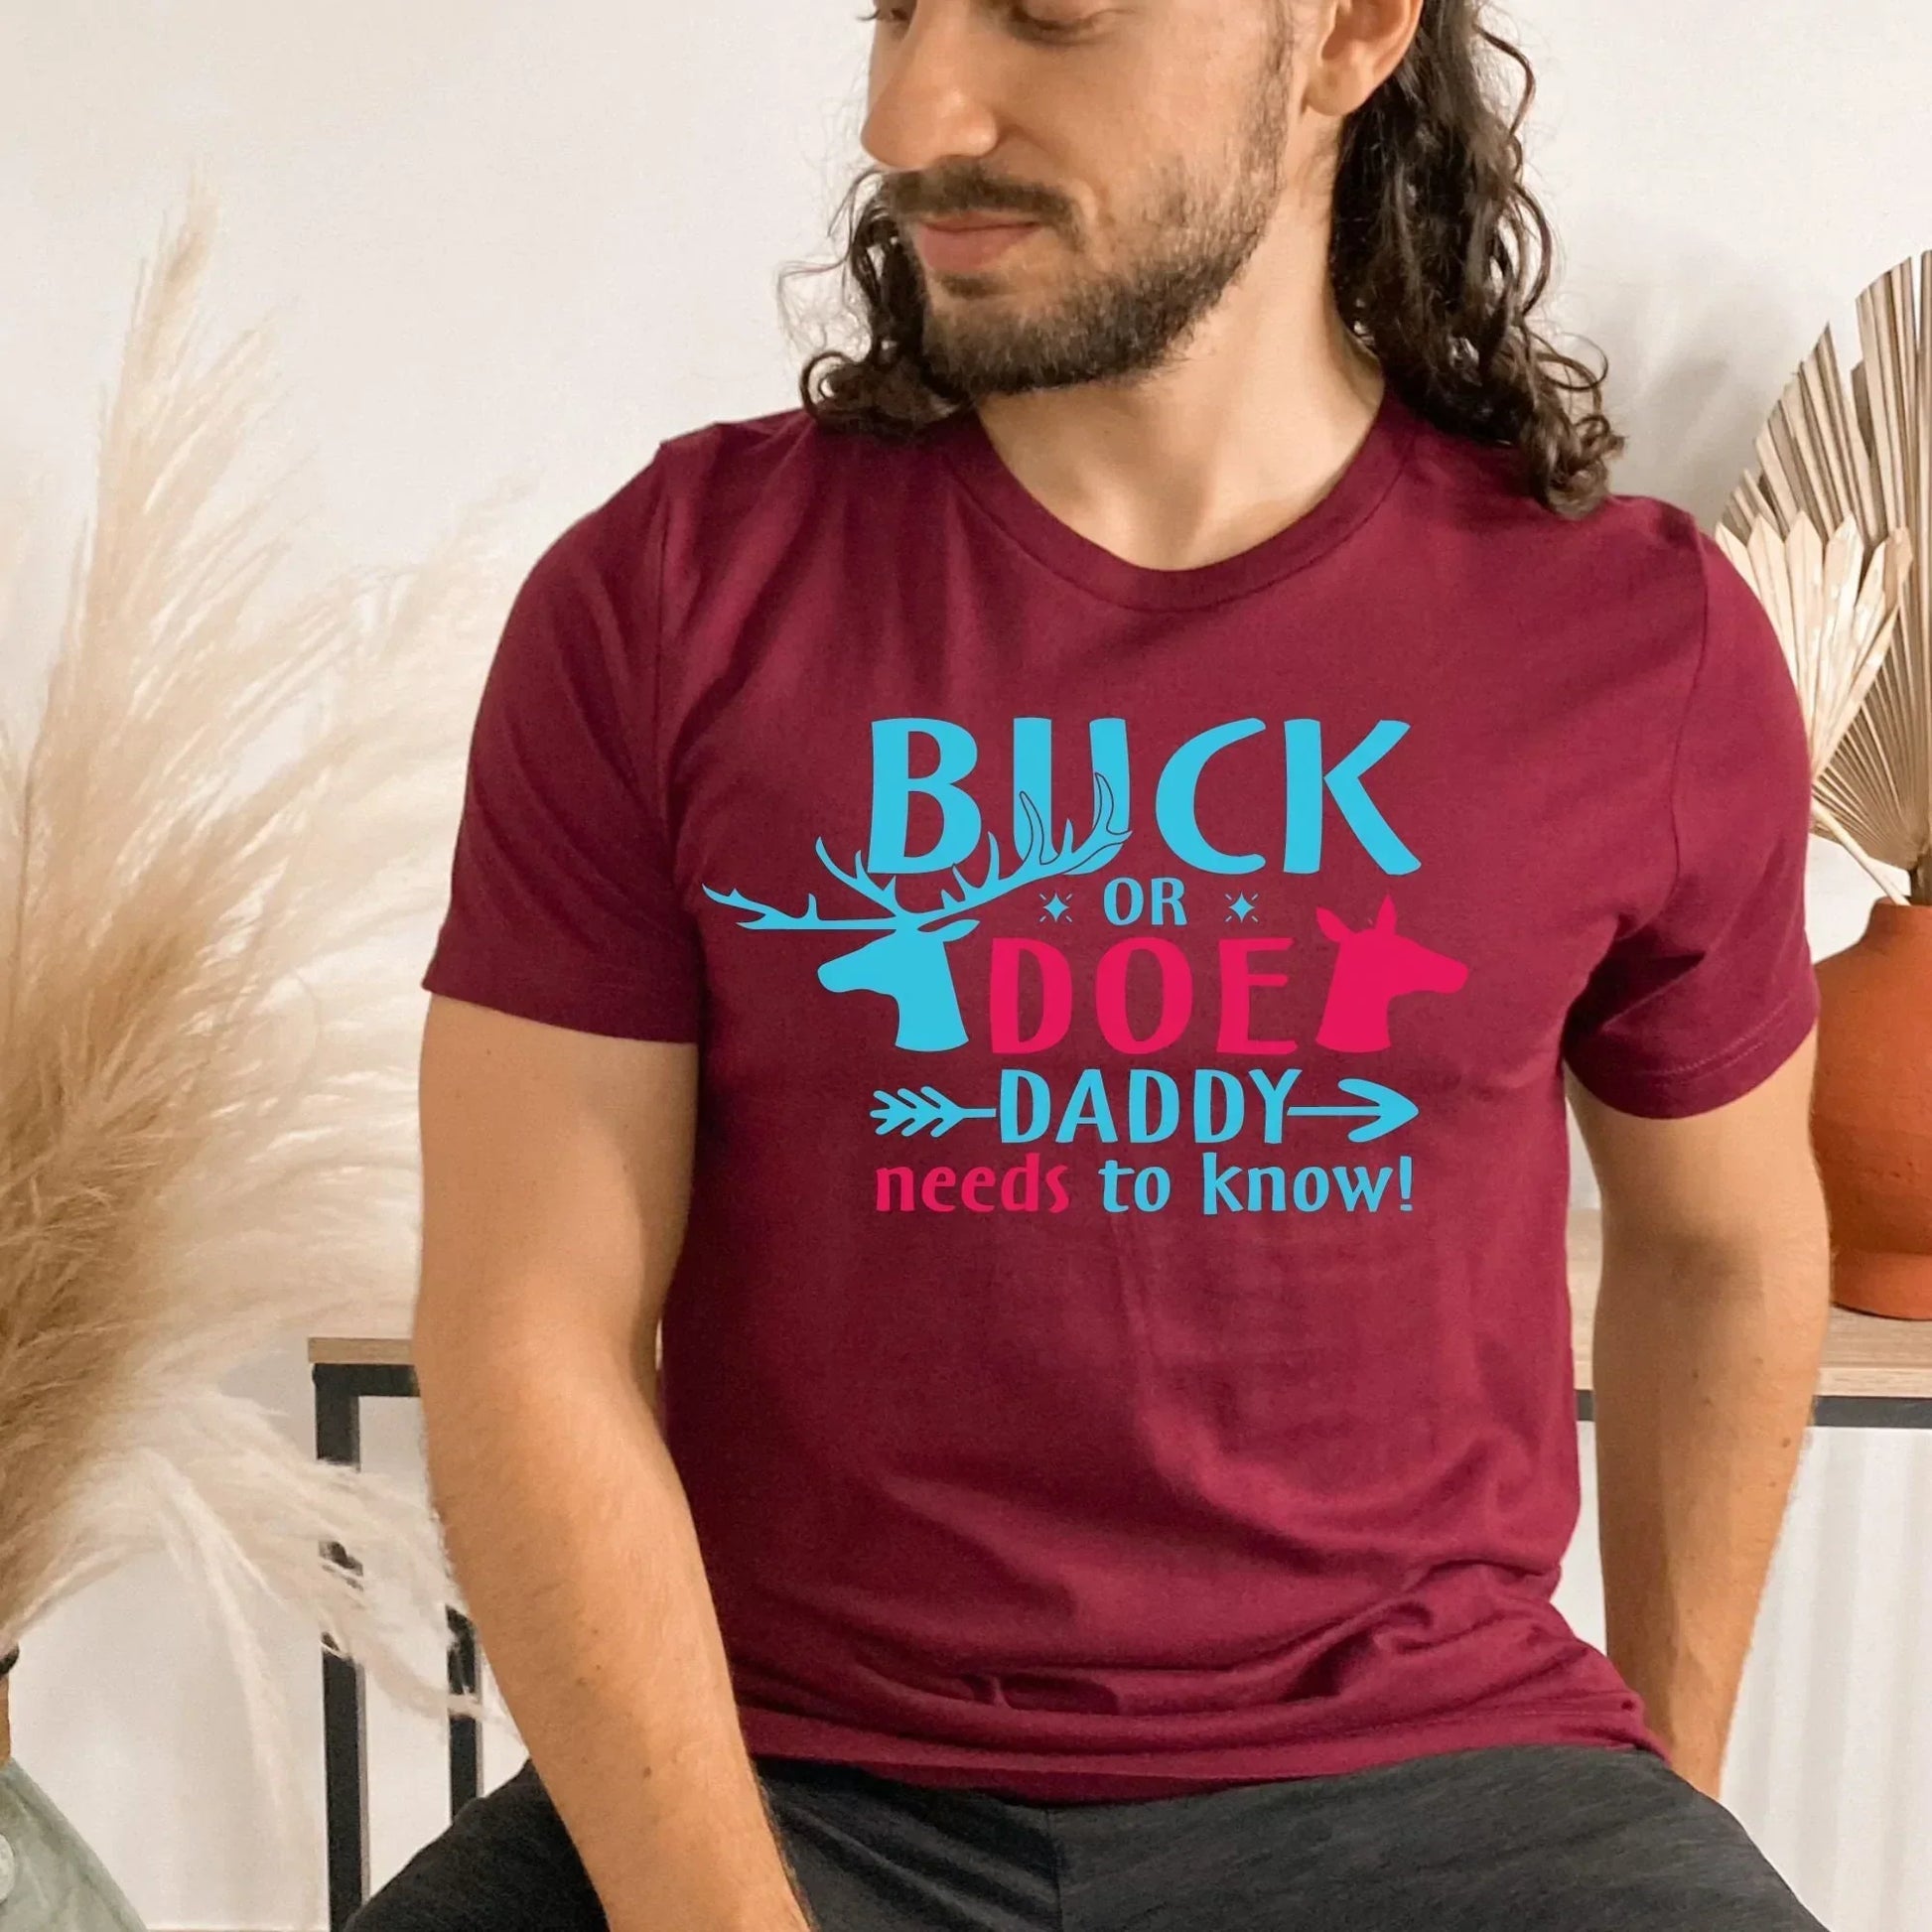 Gender Reveal Shirt, Dad To Be, Paternity shirt, Fall Sweater, Pregnancy Reveal to Family, Soon to Be Dad, Buck or Doe New Baby Coming Soon HMDesignStudioUS